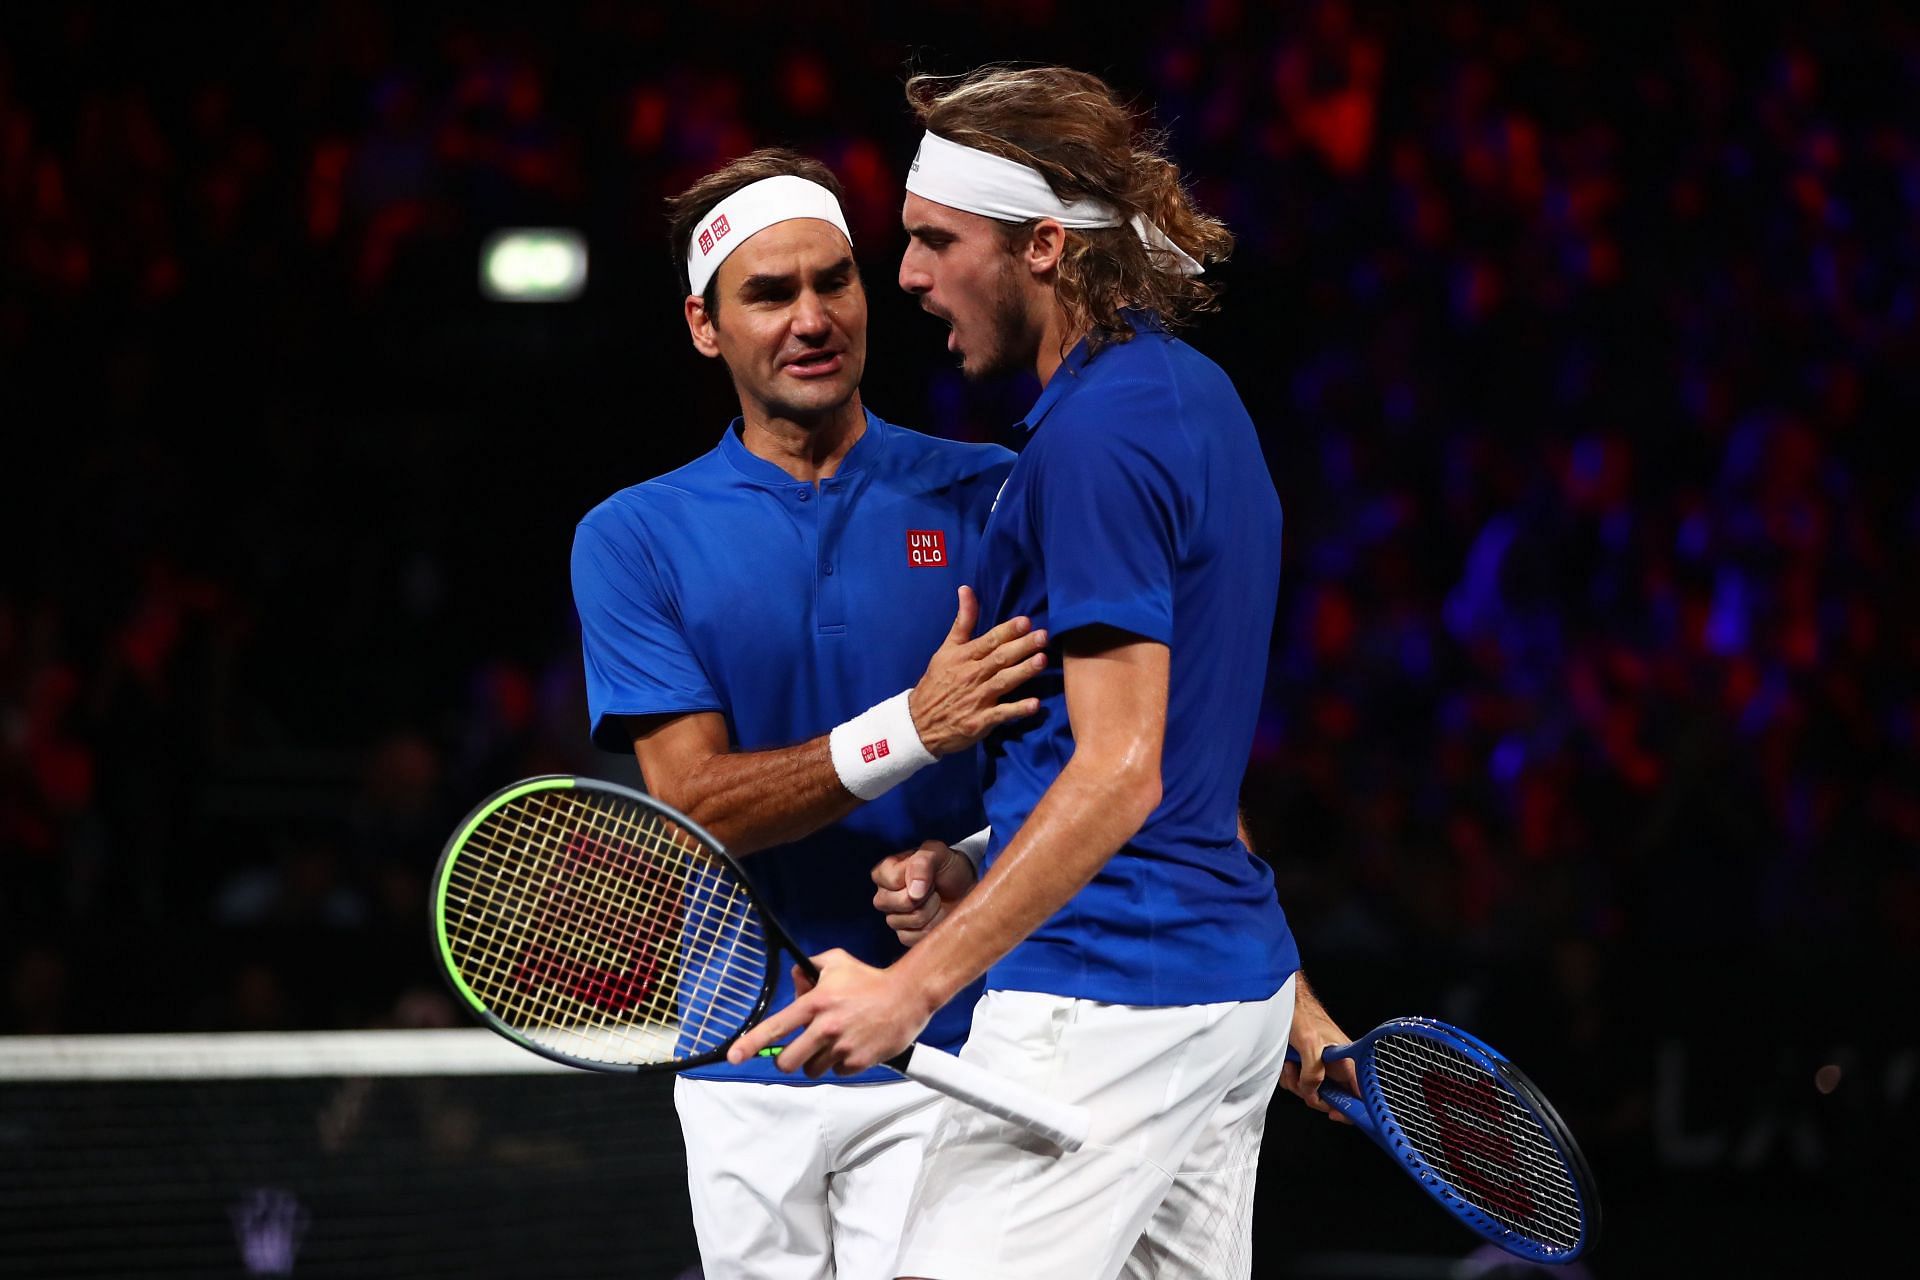 Roger Federer and Stefanos Tsitsipas at the 2019 Laver Cup.